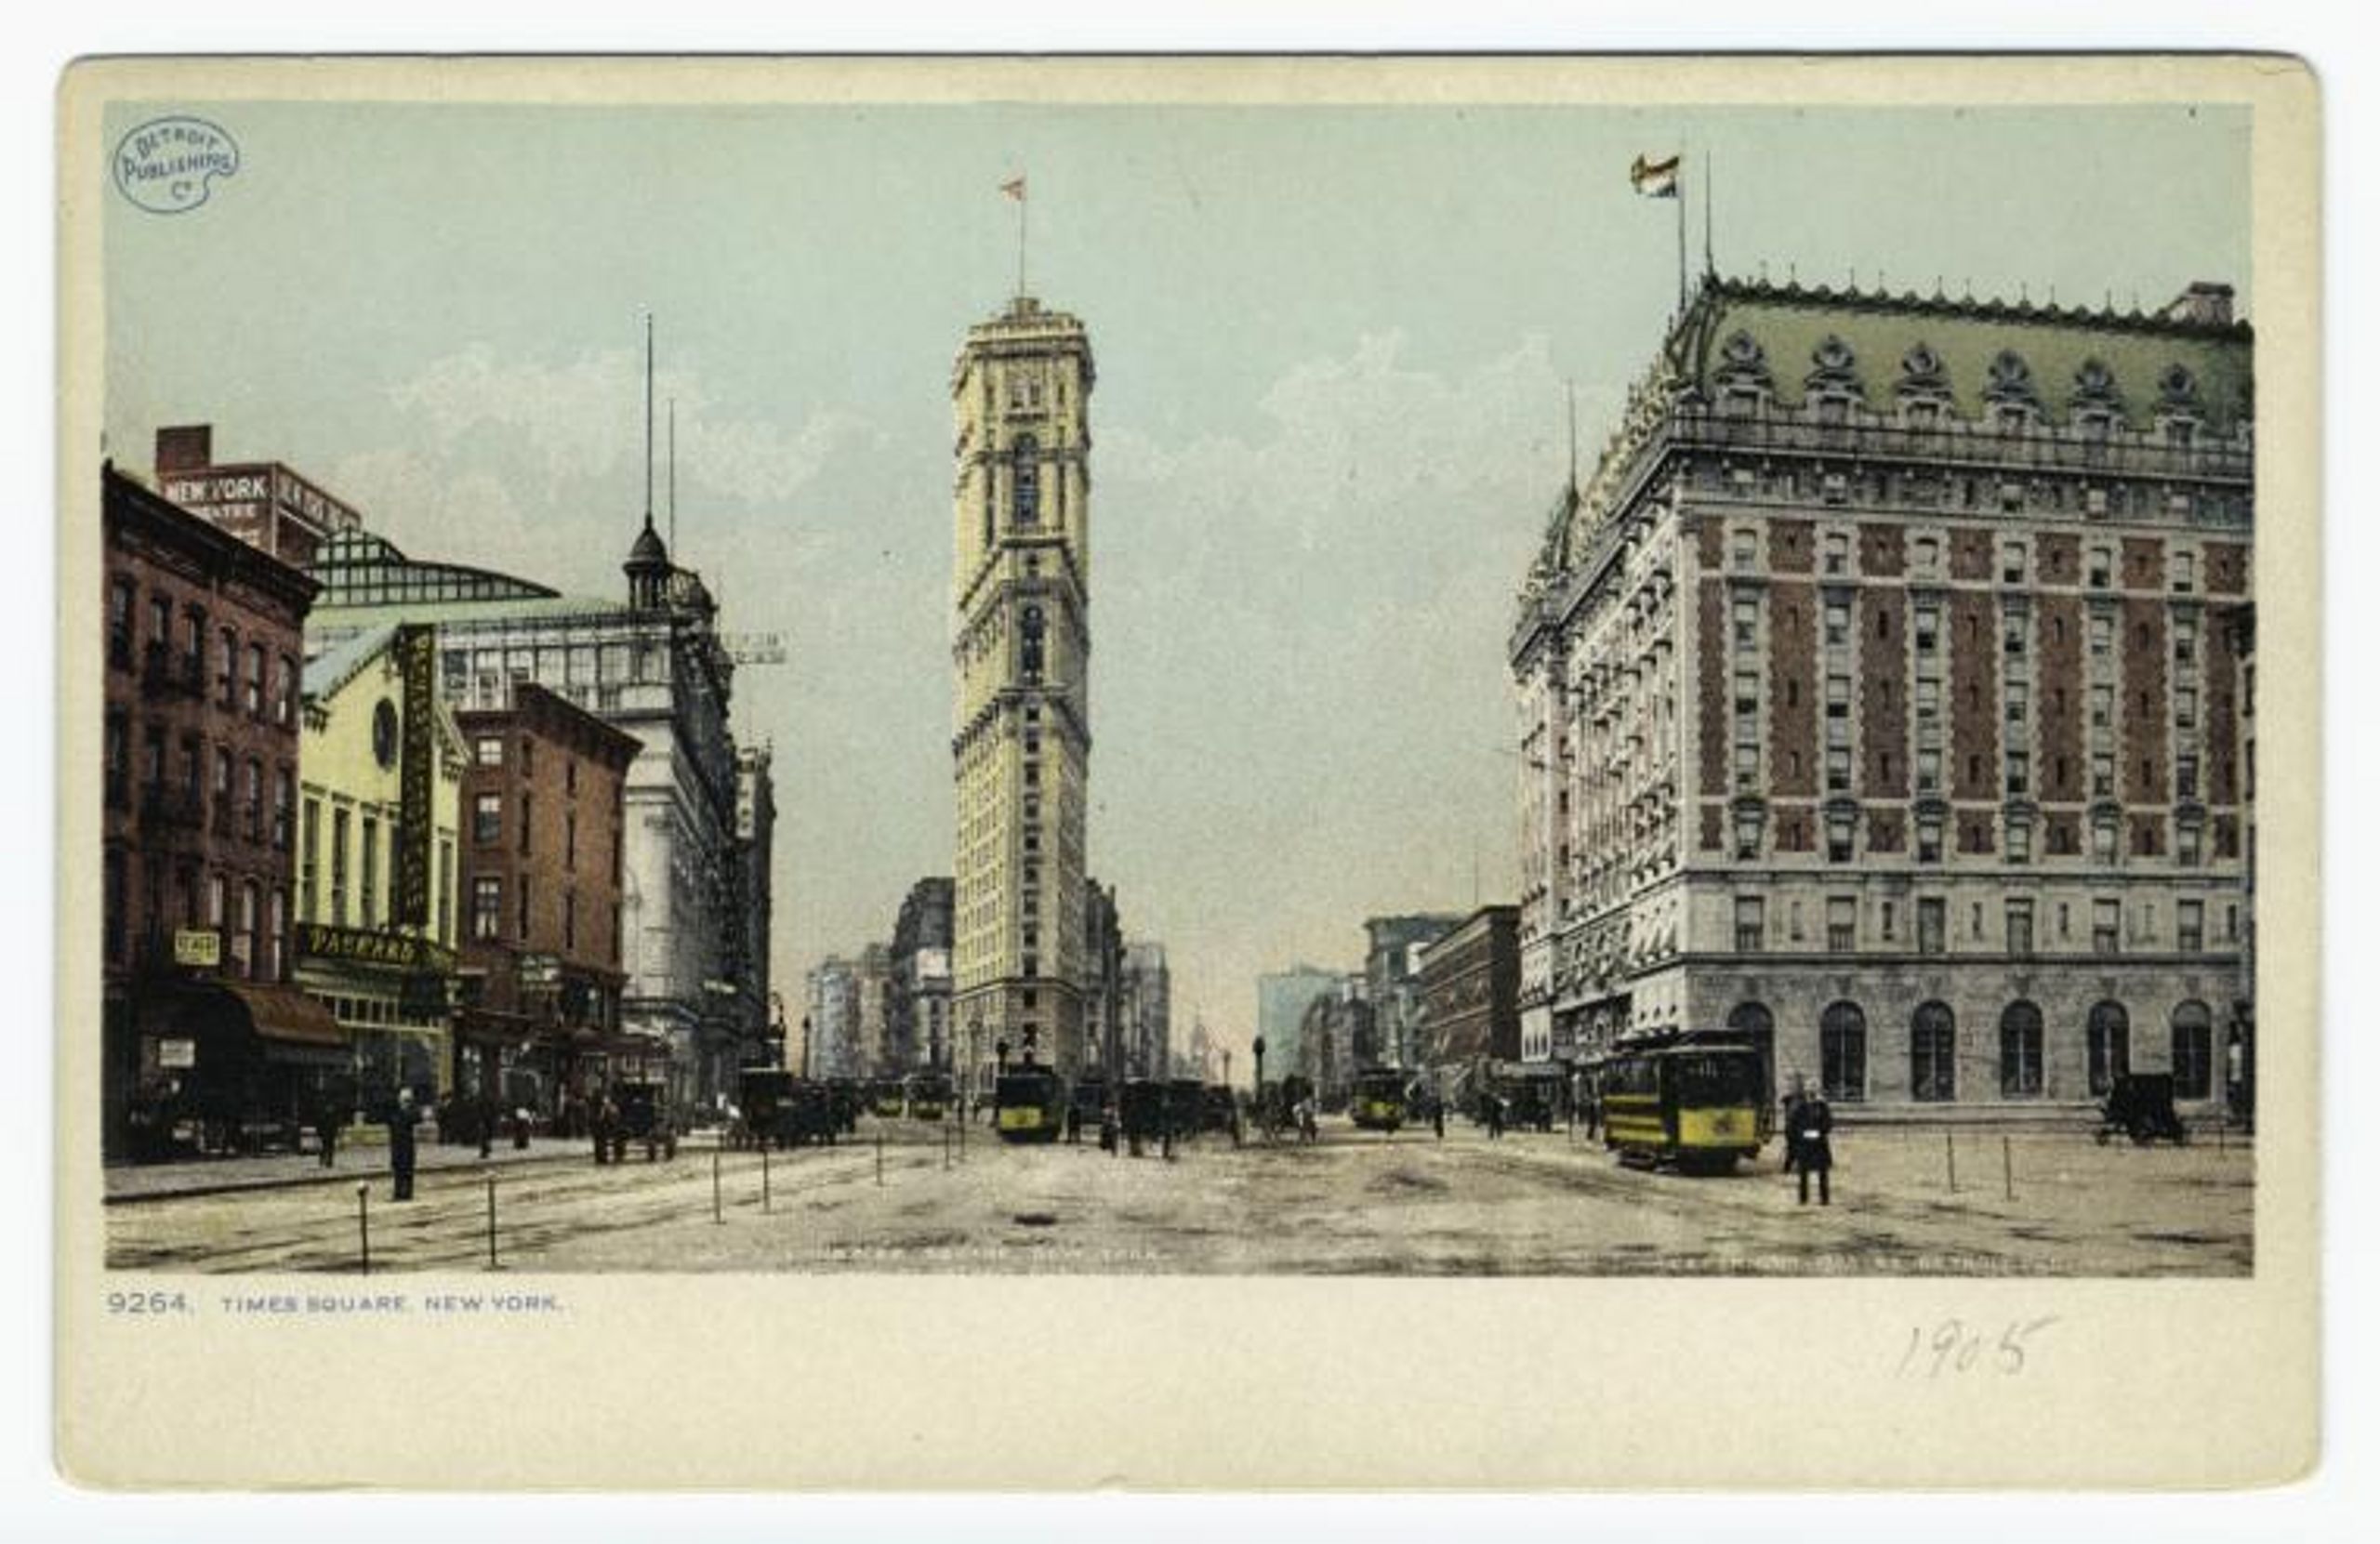 A painting of Longacre Square (now called Times Square), in New York City in 1905. The New York Times' original headquarters, One Times Square, sits in the middle. Engineering the Times Square New Year’s Eve Ball Drop.